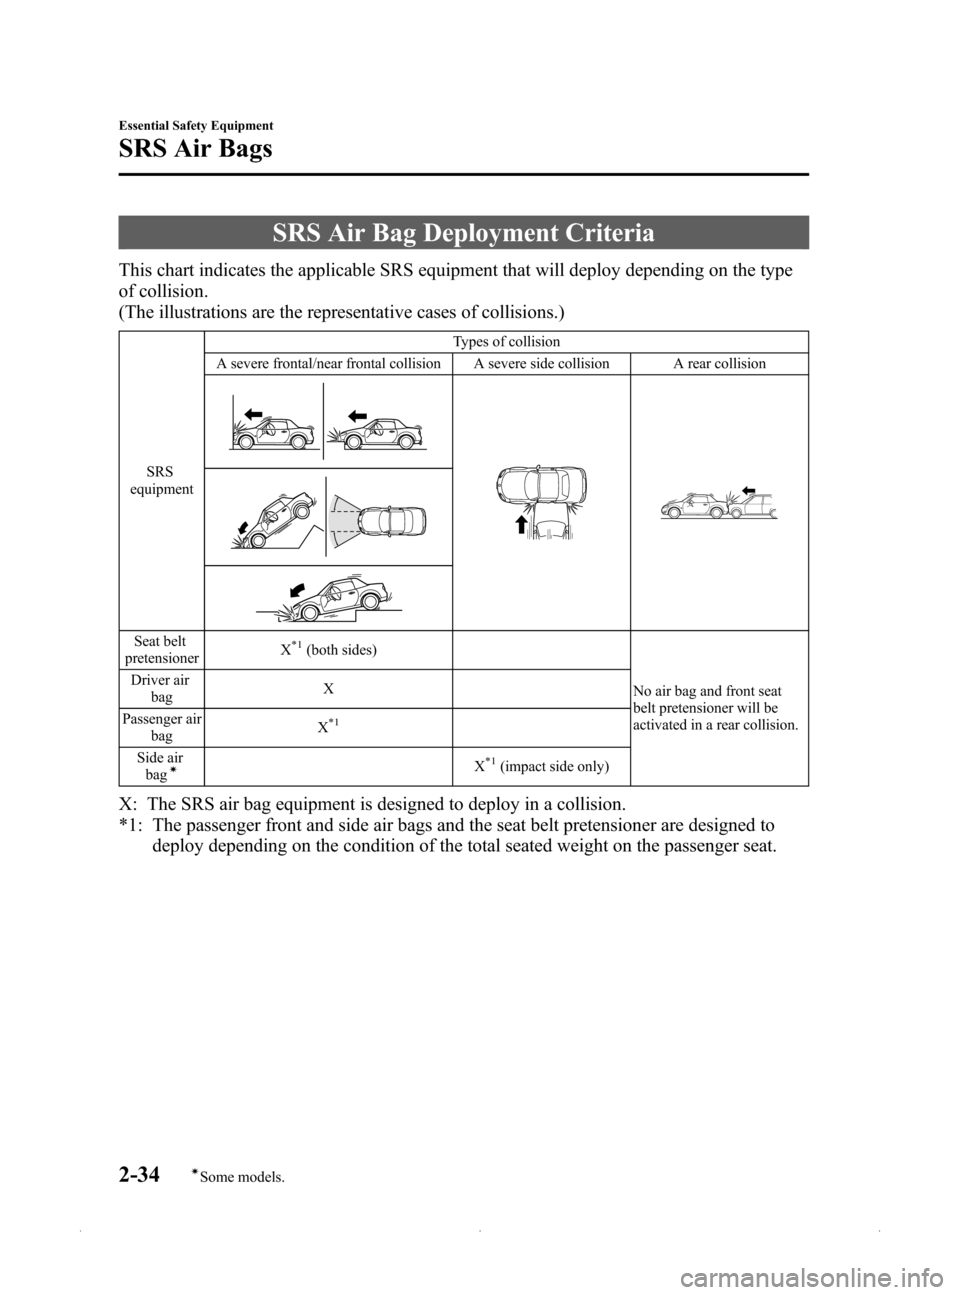 MAZDA MODEL MX-5 2015  Owners Manual (in English) Black plate (46,1)
SRS Air Bag Deployment Criteria
This chart indicates the applicable SRS equipment that will deploy depending on the type
of collision.
(The illustrations are the representative case